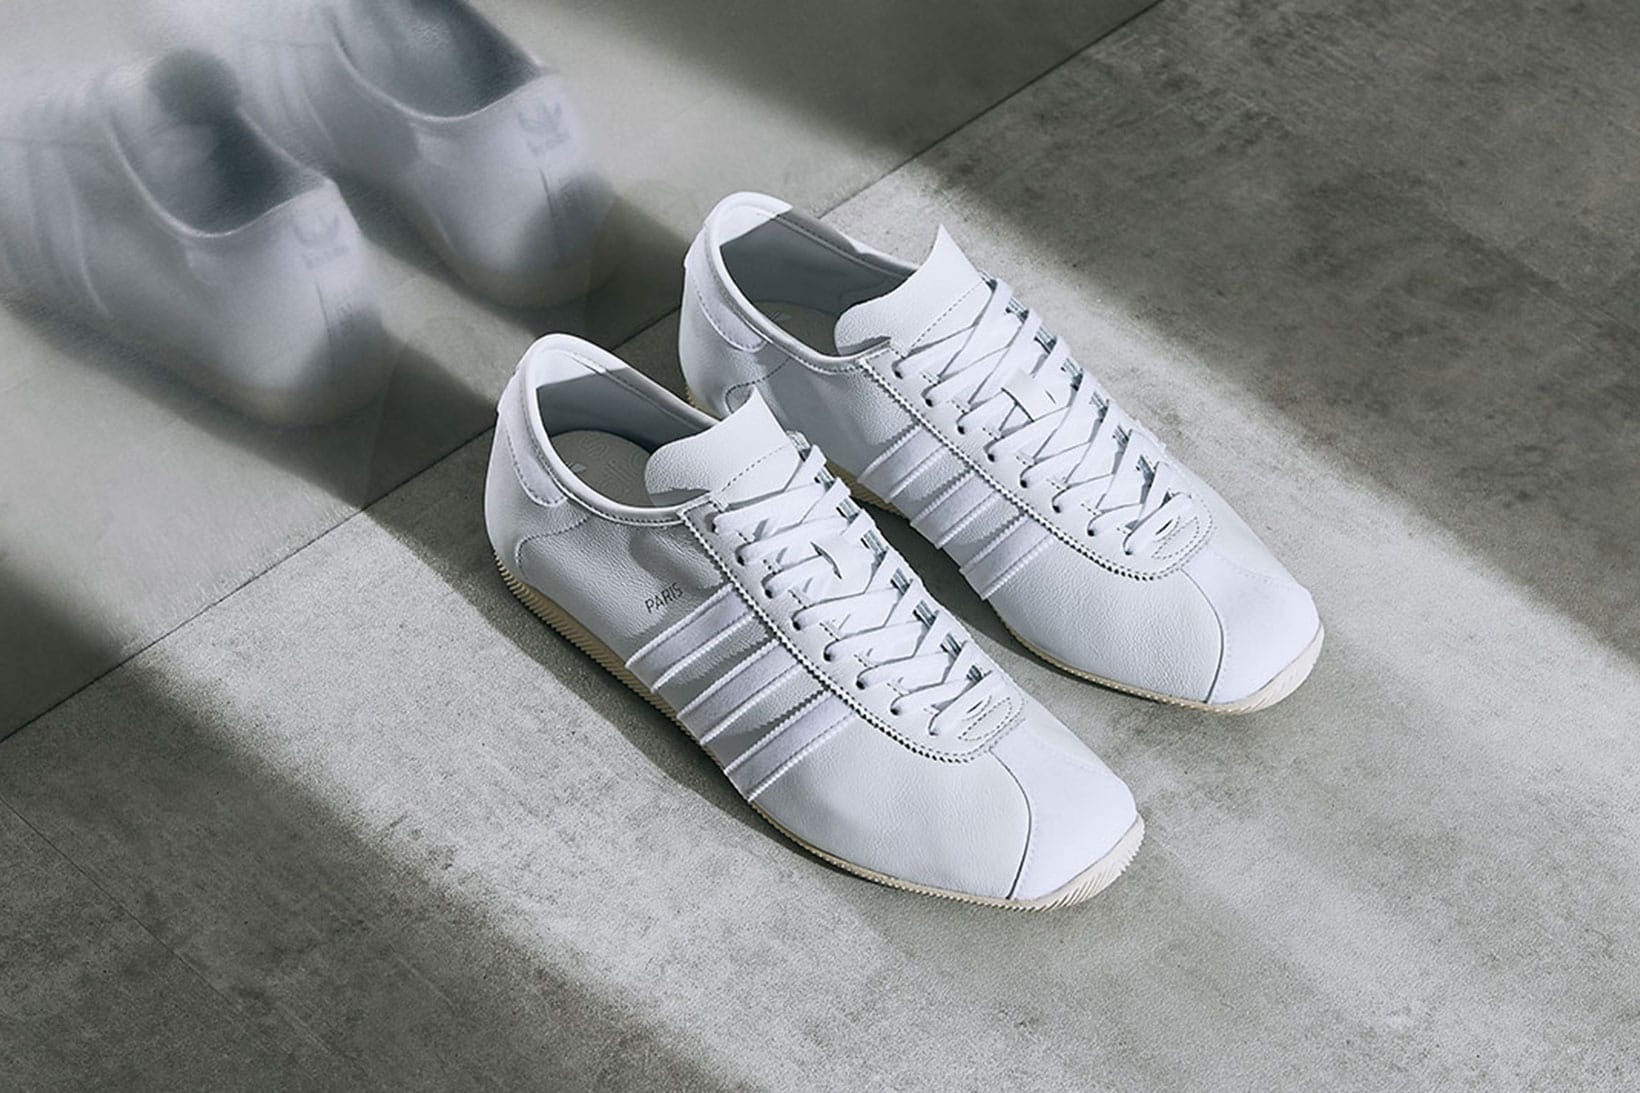 adidas white limited edition